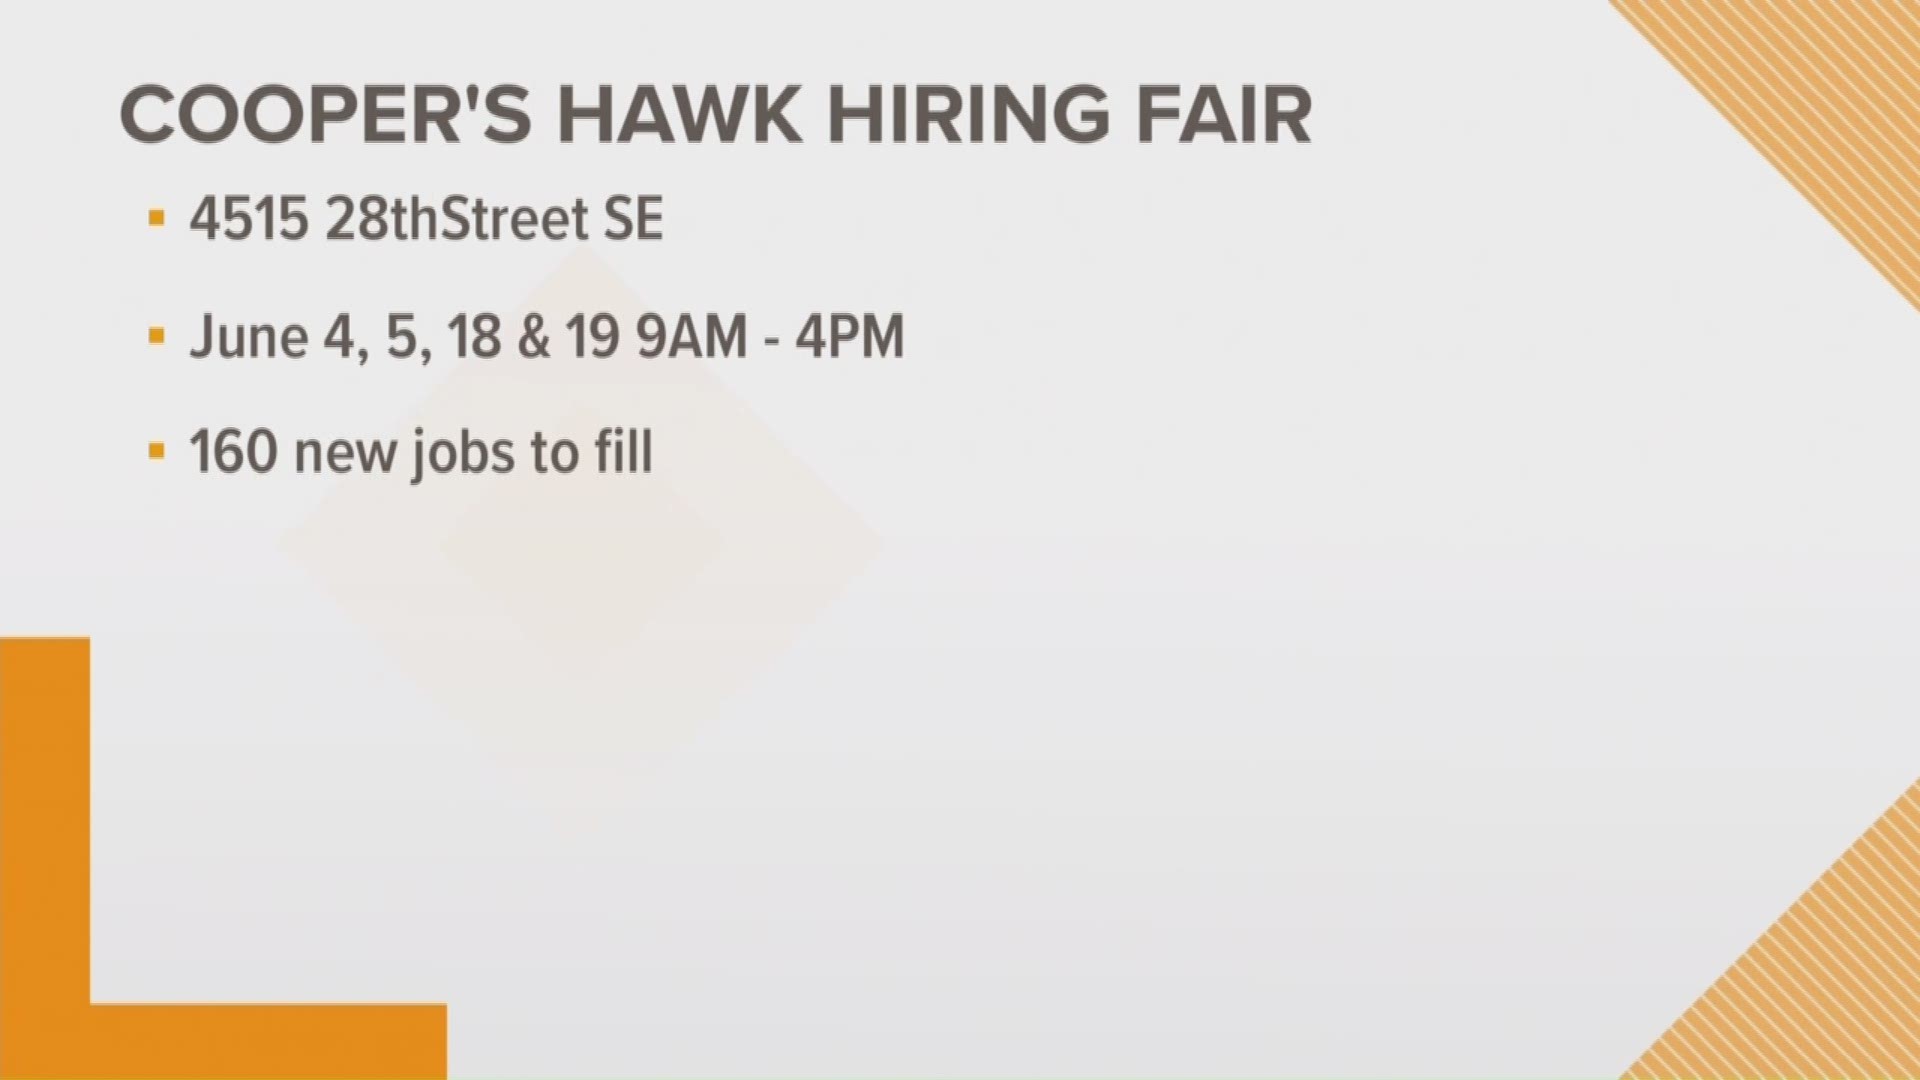 Coopers Hawk Winery and Restaurant is opening it's first West Michigan location in Kentwood. On Tuesday, June 4, the winery is hosting a job fair to fill about 160 open positions. It will take place at the Kentwood location at 9 a.m.